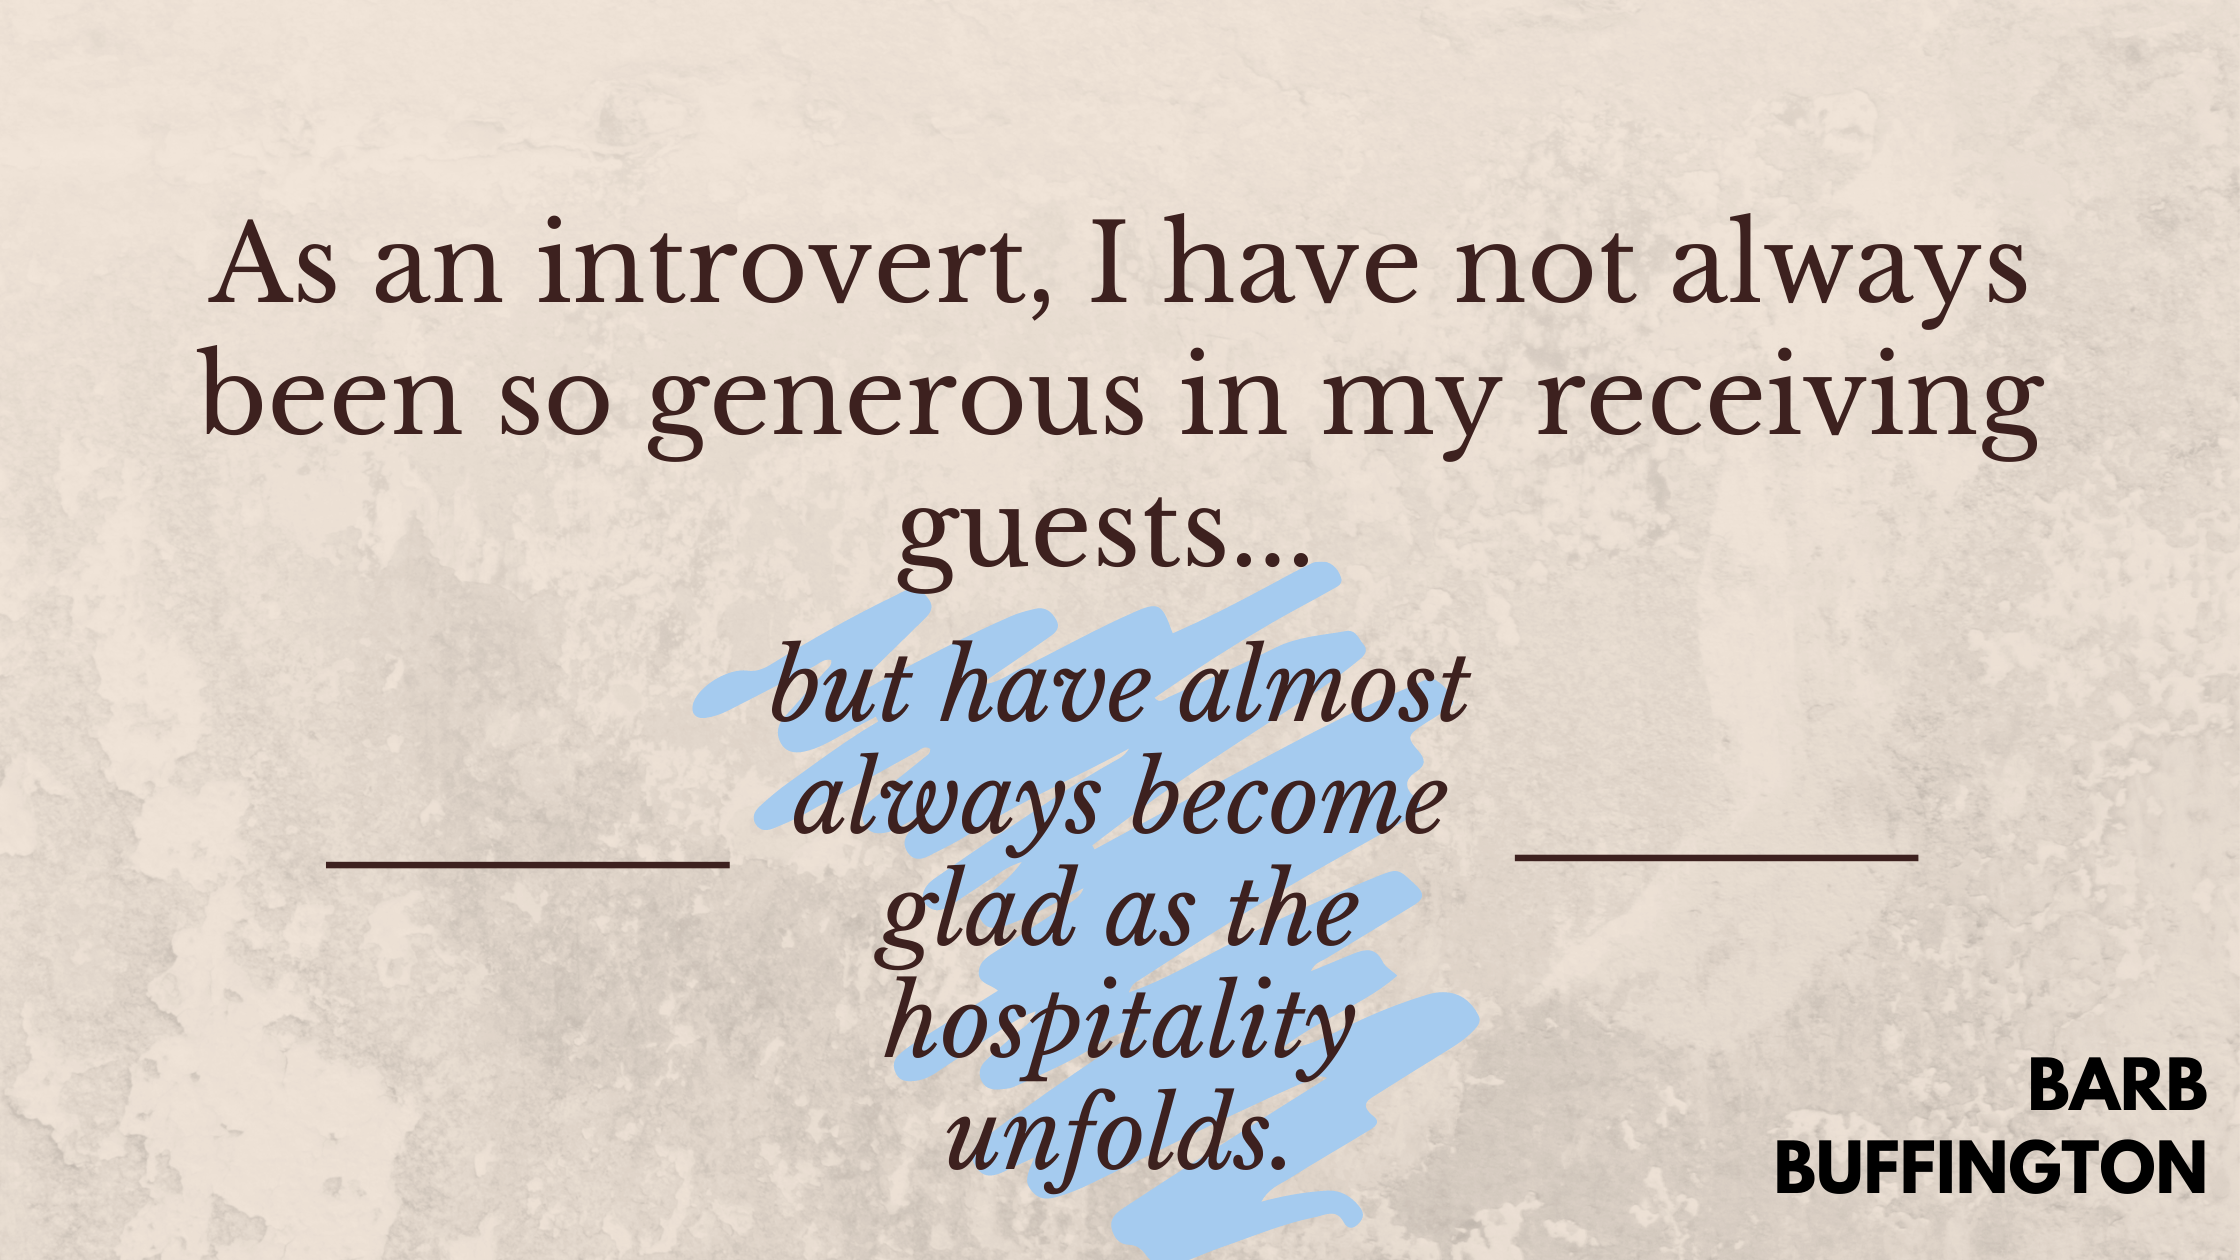 As an introvert, I have not always been so generous in my receiving guests